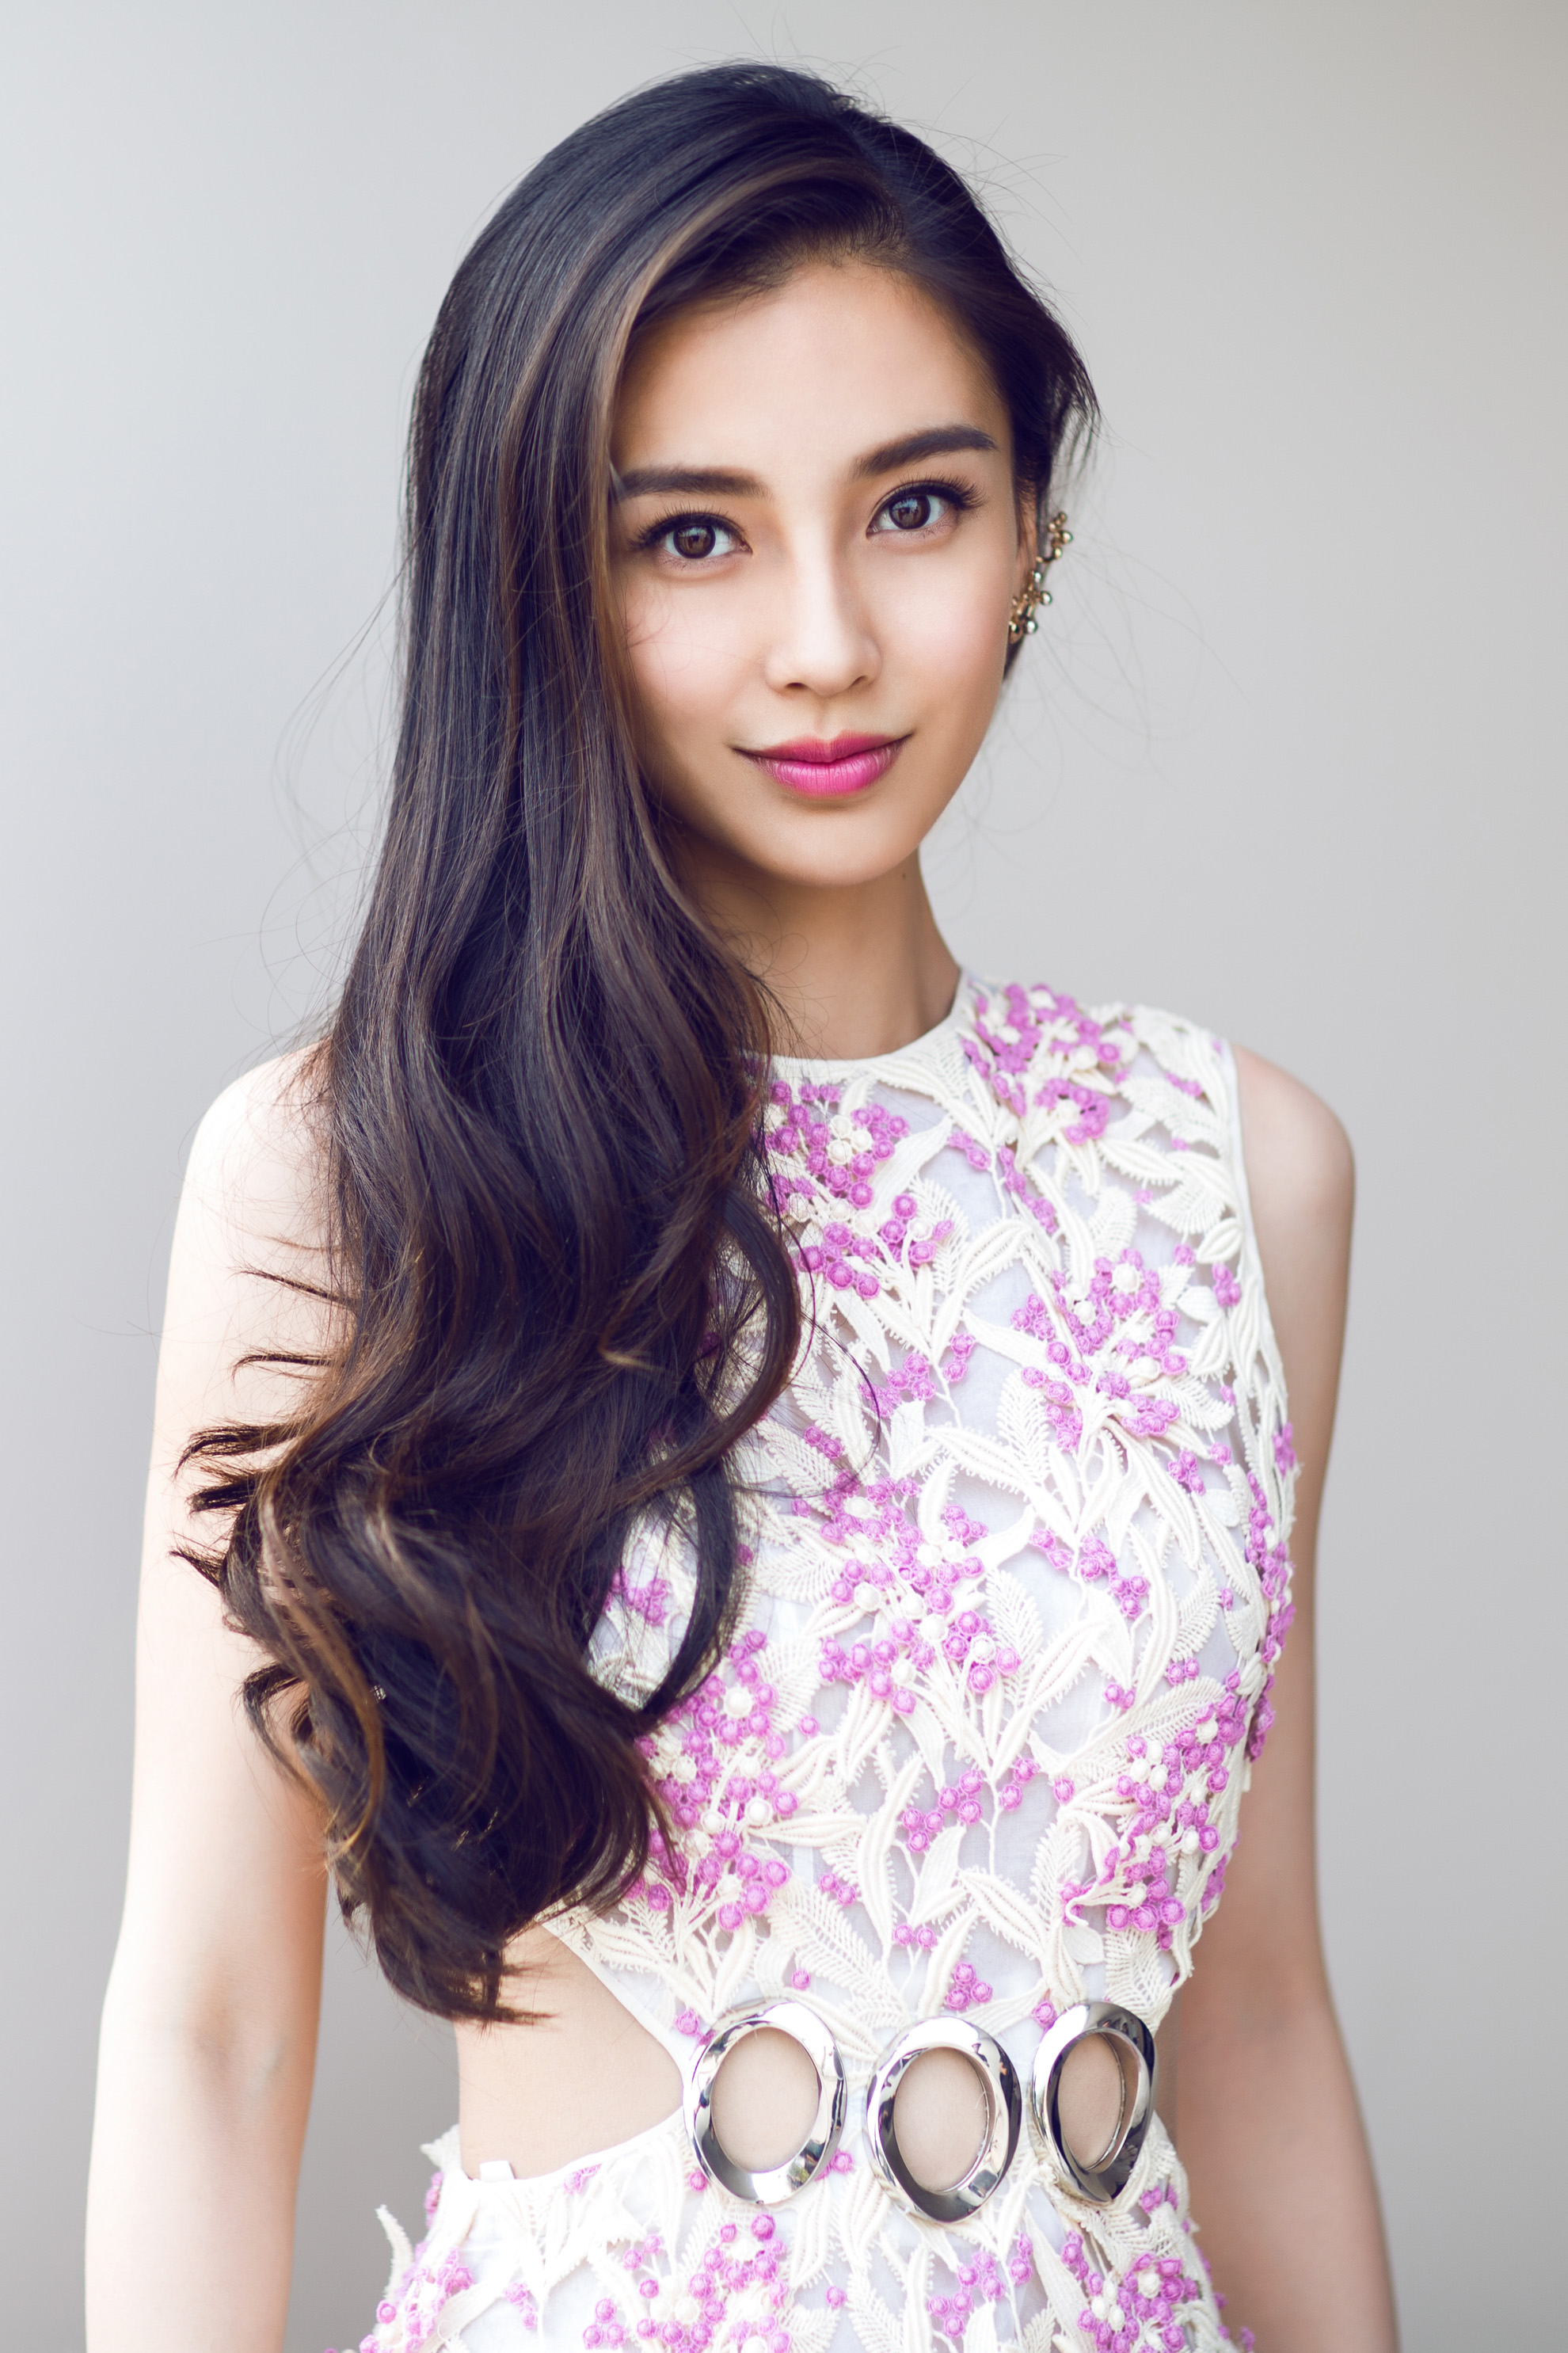 Angelababy Wins Court Case Against Hospital For Using Pics Of Her ...